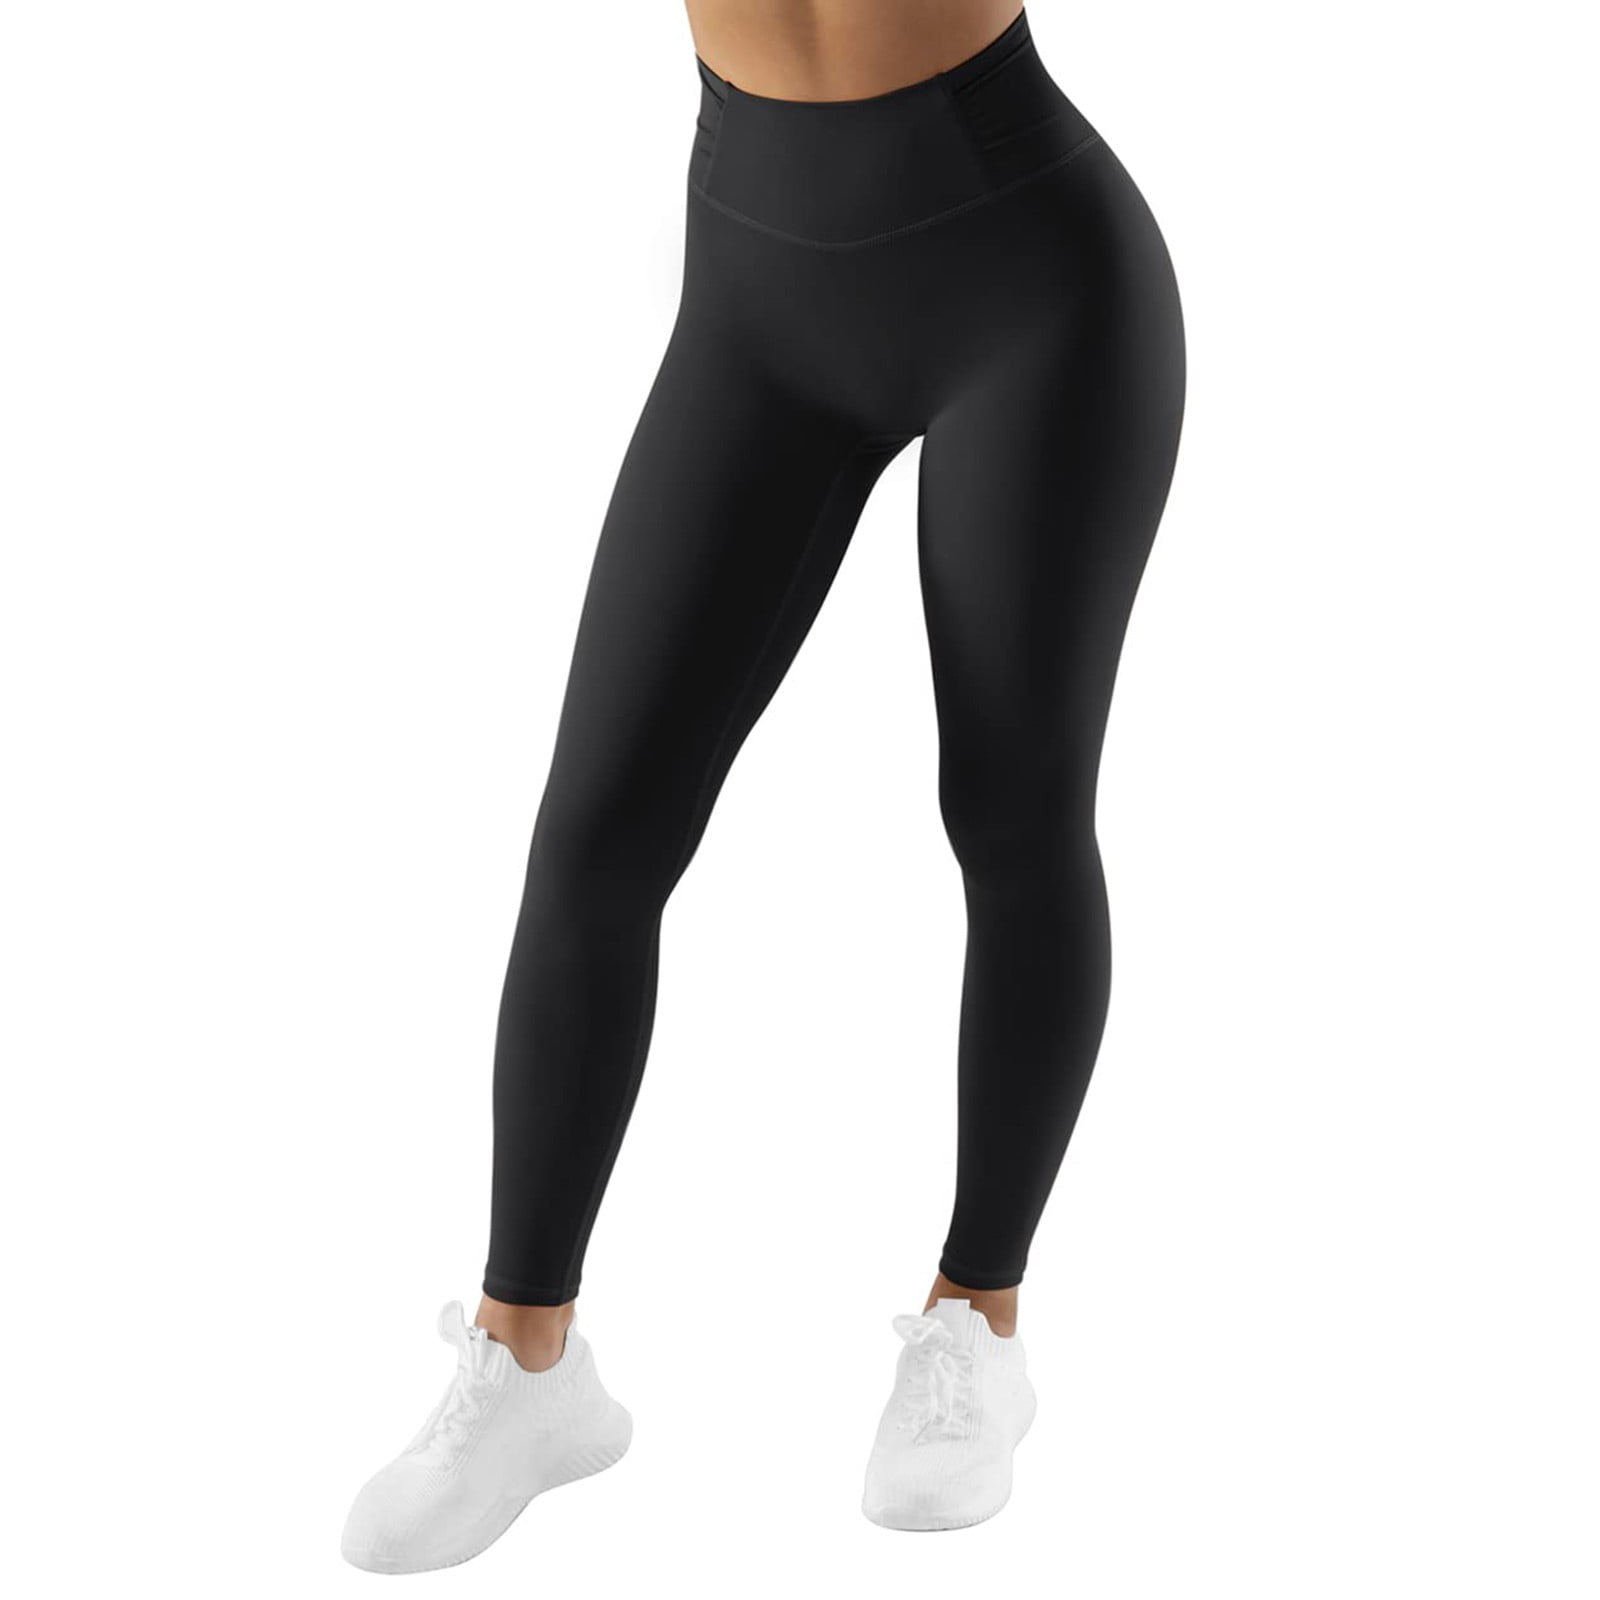 Tummy Control Leggings for Women No Front Seam Ruched Cropped Pants Black  XXL